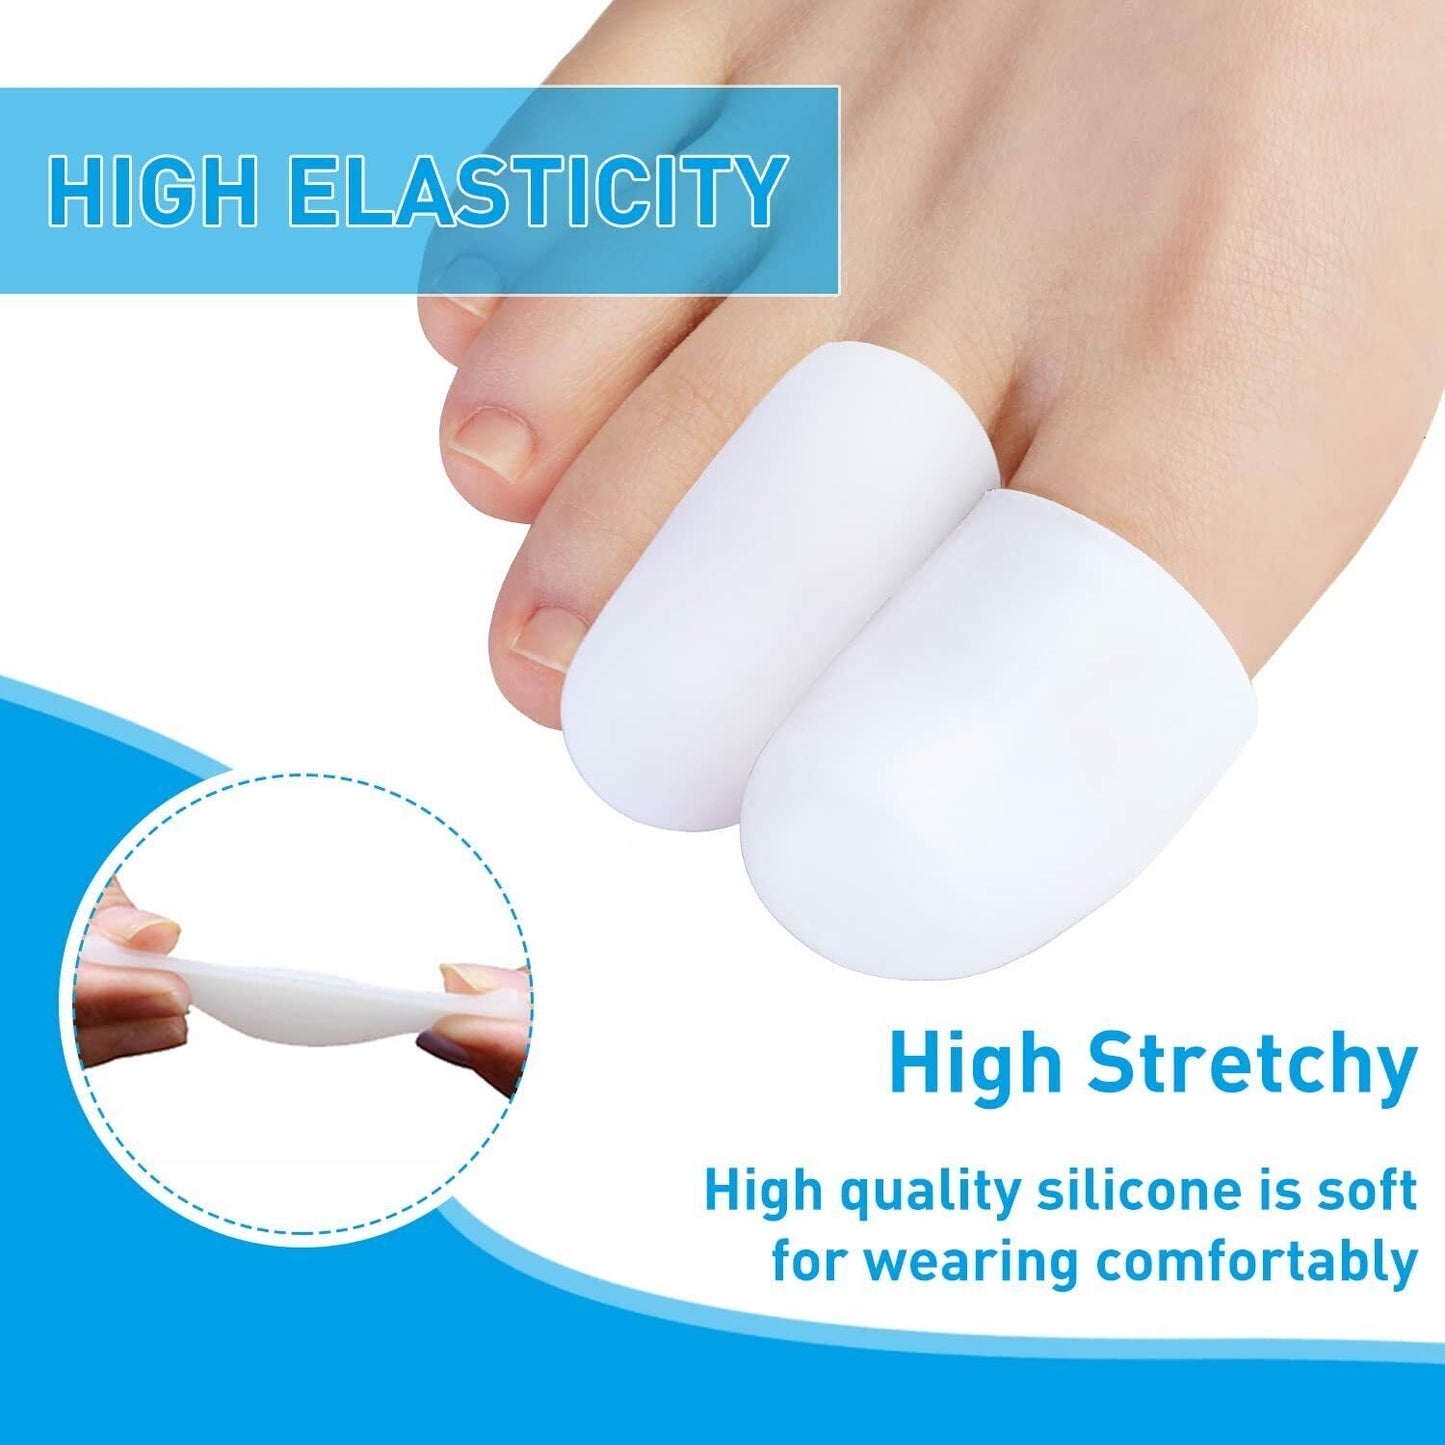 Soft Silicon Foot Big Toe Tubes Blisters Bunion Sleeve Toes Separaters Cover Cap